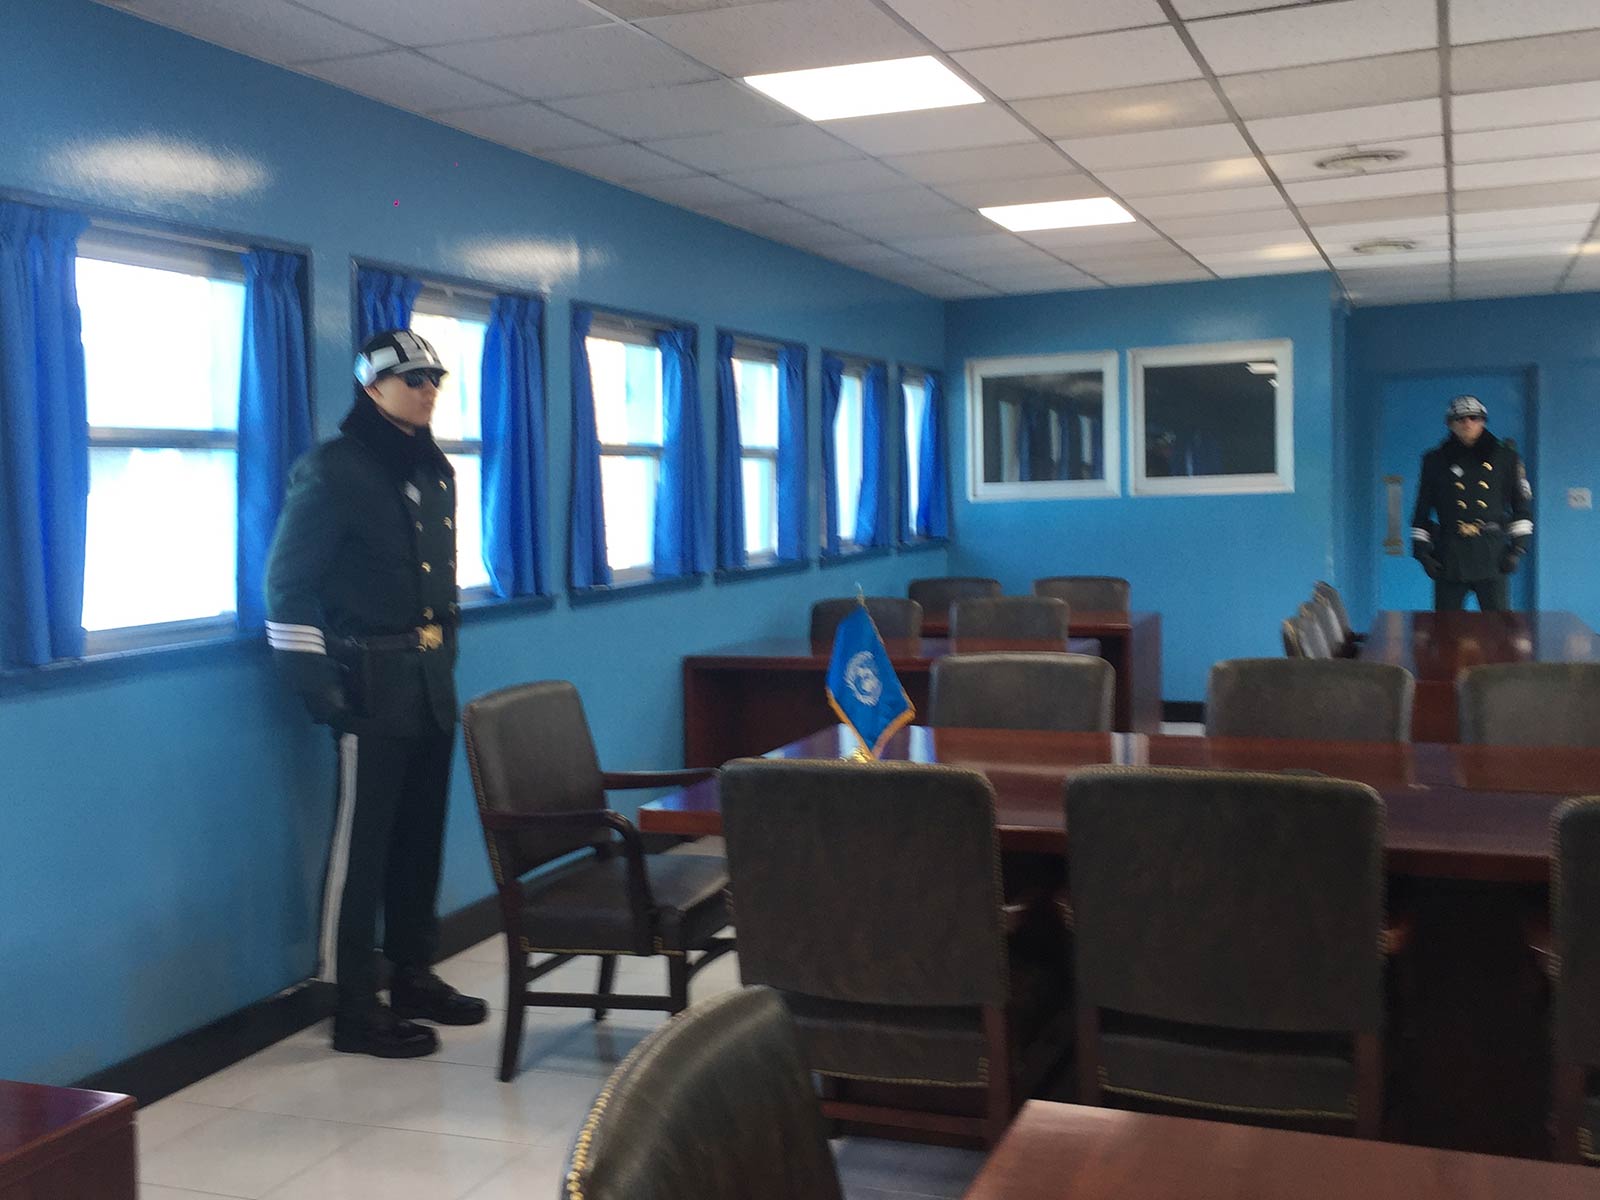 Inside the Joint Security Area in DMZ, South Korea. The DMZ